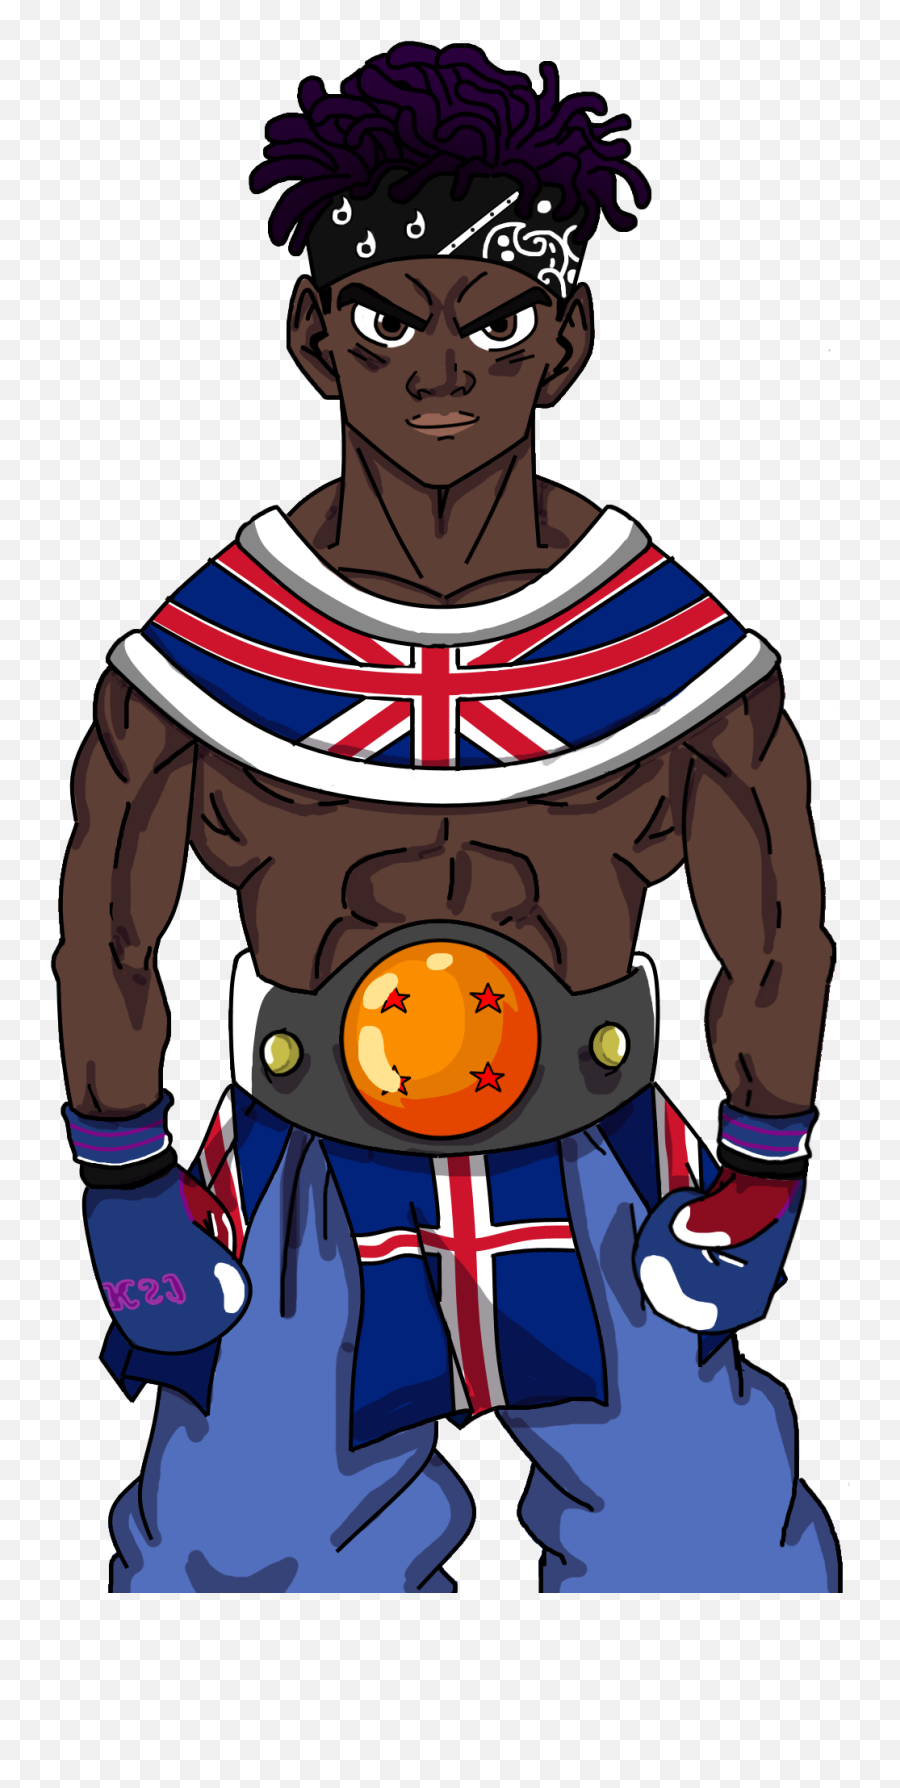 Drew Ksi In A Dragon Ball - Ish Style Hope Yall Like It Ksi Ksi Dragon Ball Style Png,Dragon Ball Png